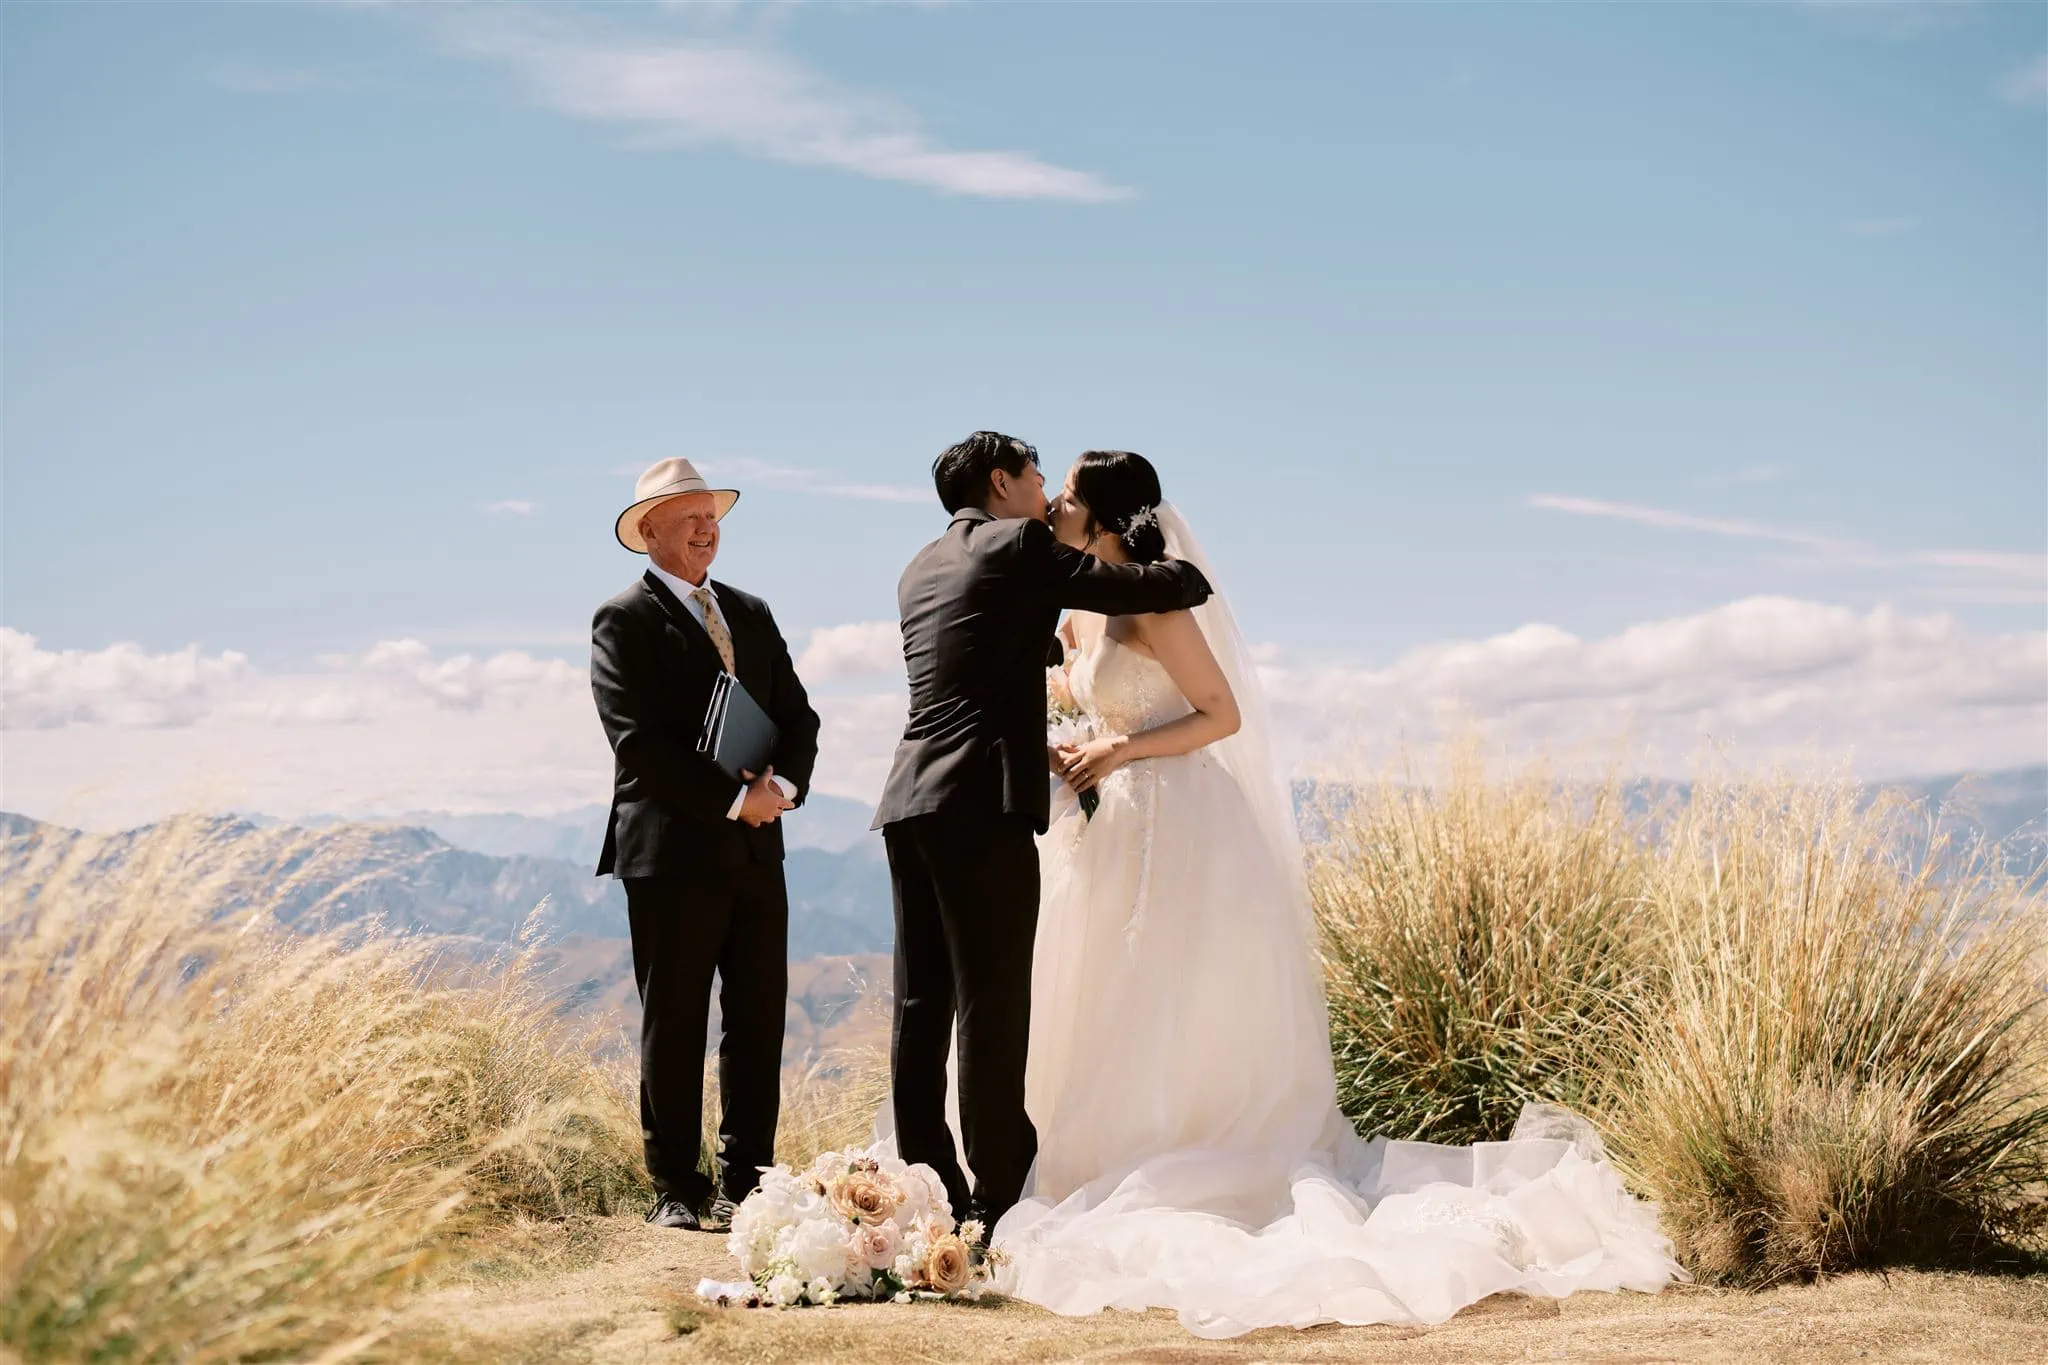 Kyoto Tokyo Japan Elopement Wedding Photographer, Planner & Videographer | A couple exchanging a kiss at their wedding ceremony outdoors with an officiant standing by and scenic mountains in the background, captured meticulously by a Japan Wedding Photographer.